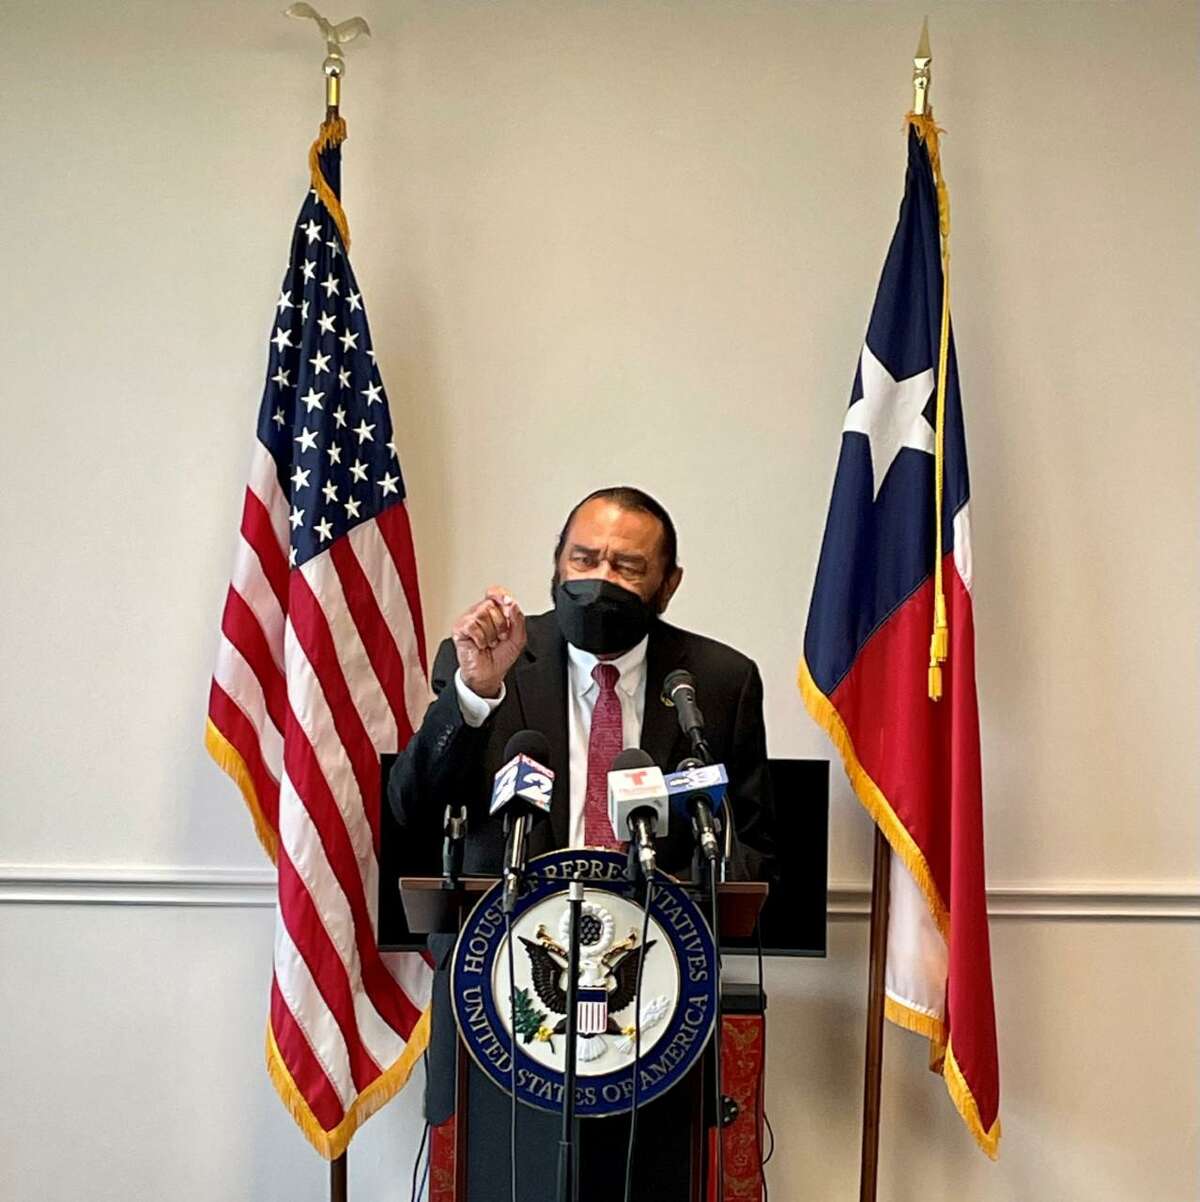 “Gun violence prevention is about more than politics, it’s about life and death,” Congressman Al Green said at a news conference on June 6. “Influentials must take a stand against do-nothing politics.”